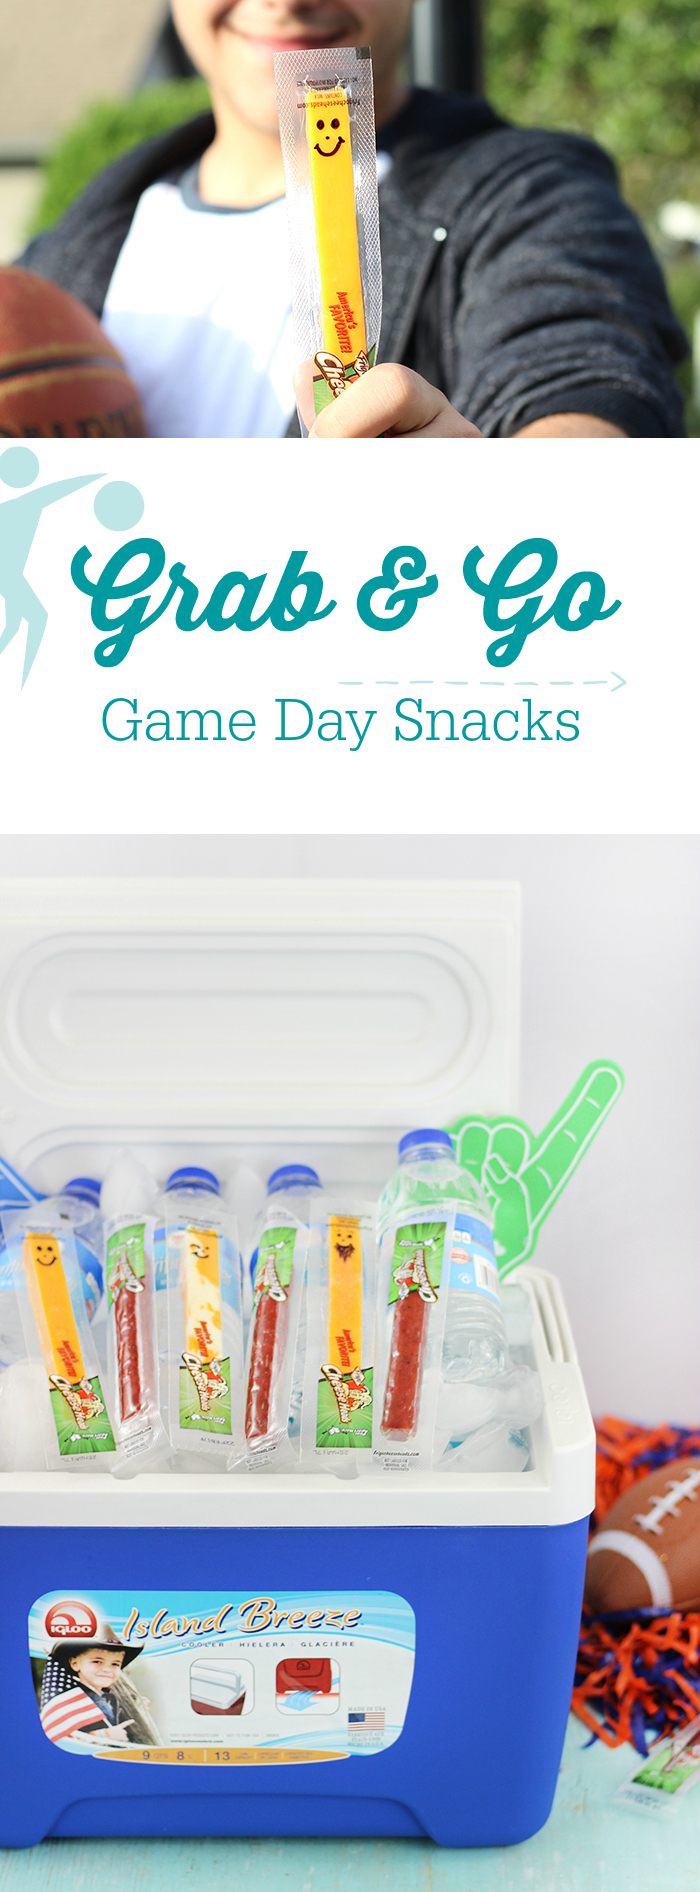 Grab and go snack ideas for teens and adults on the go.